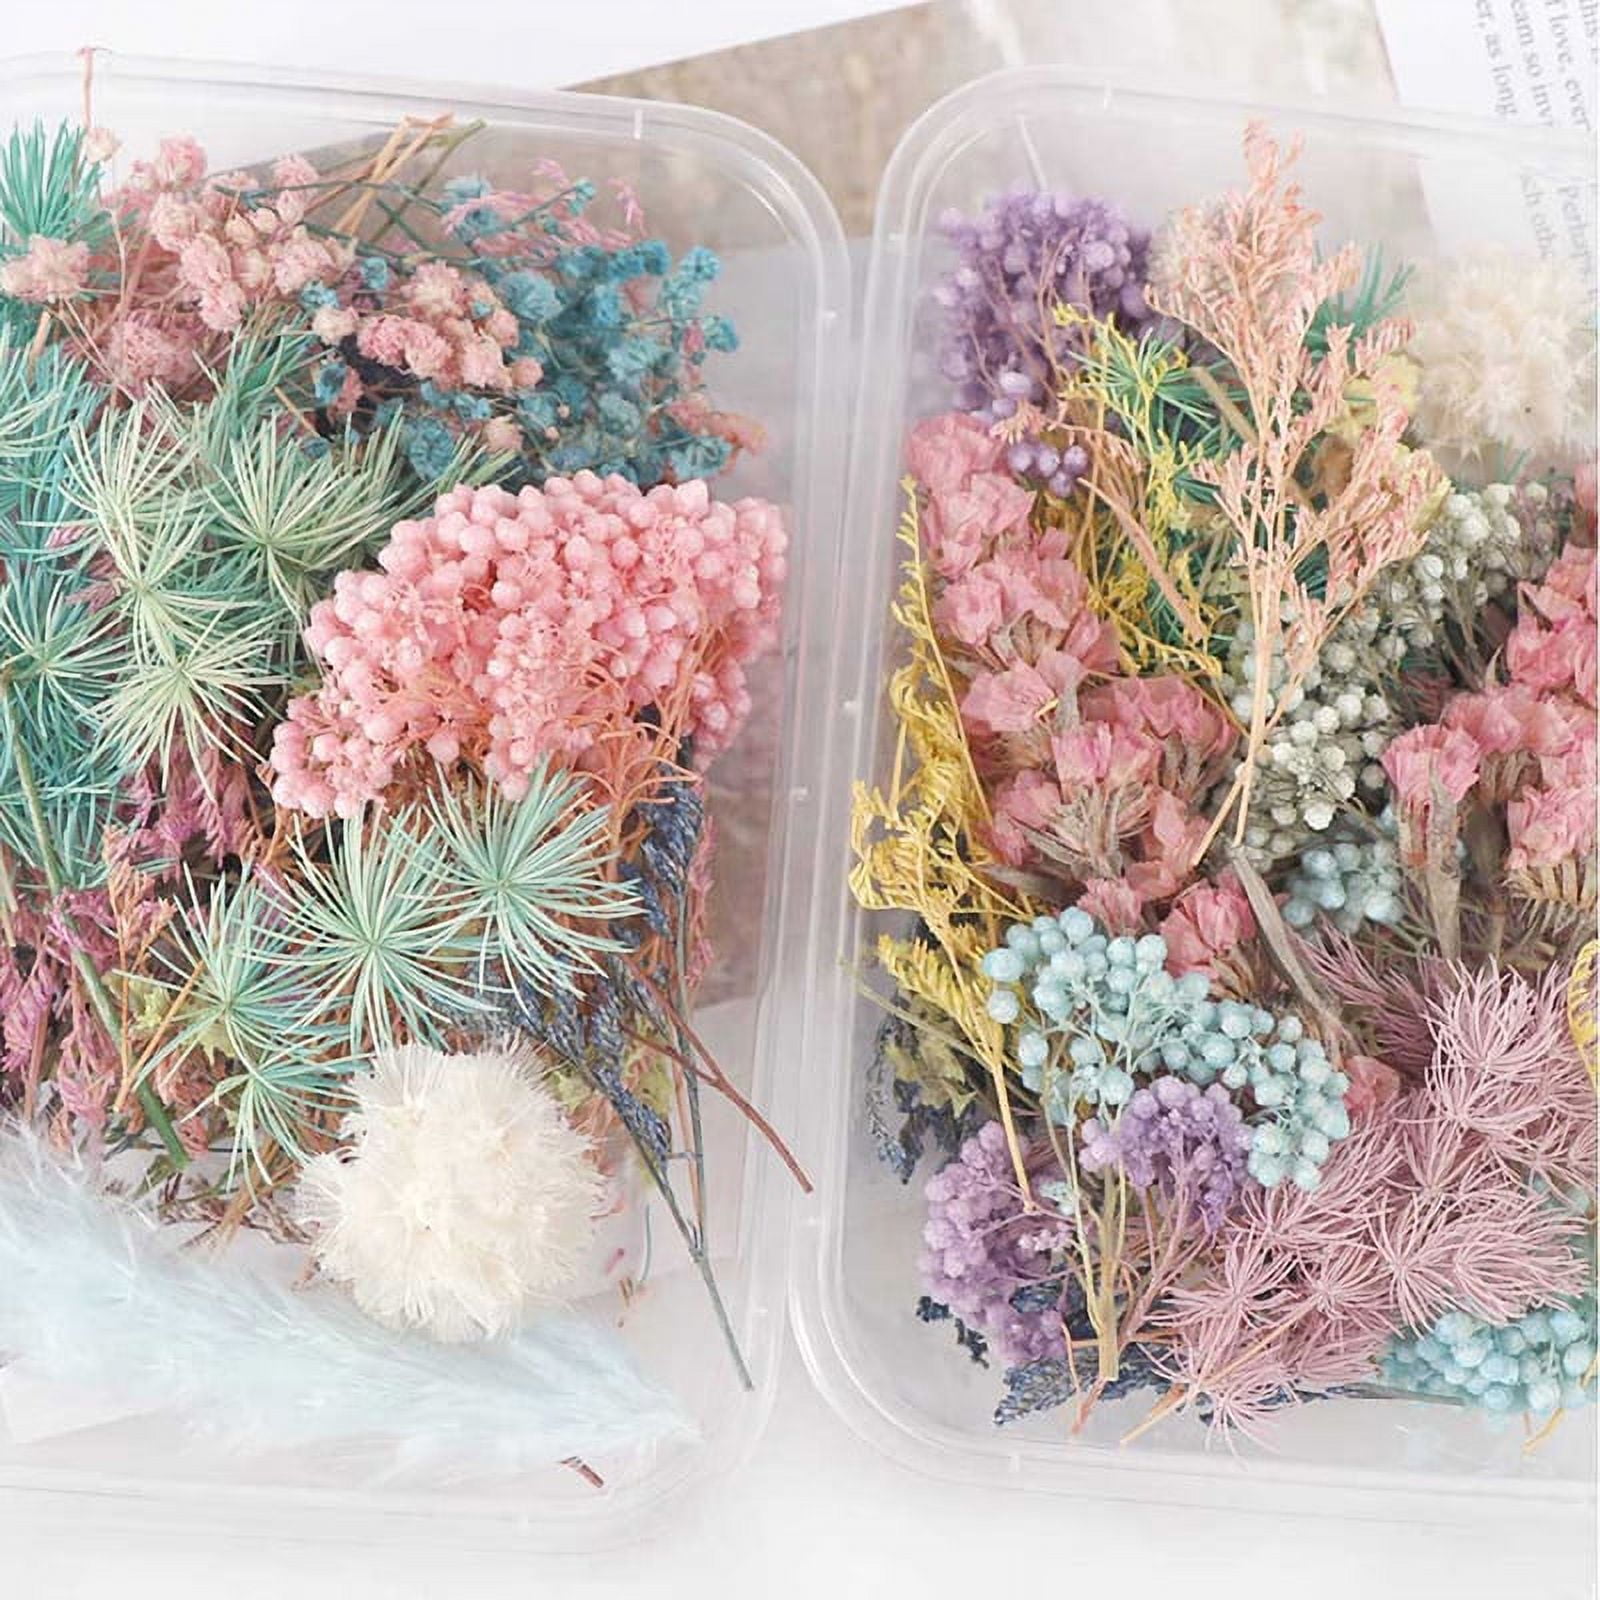 10 Best Dried Flower Kits For Resin - Crafty DIY Artistry